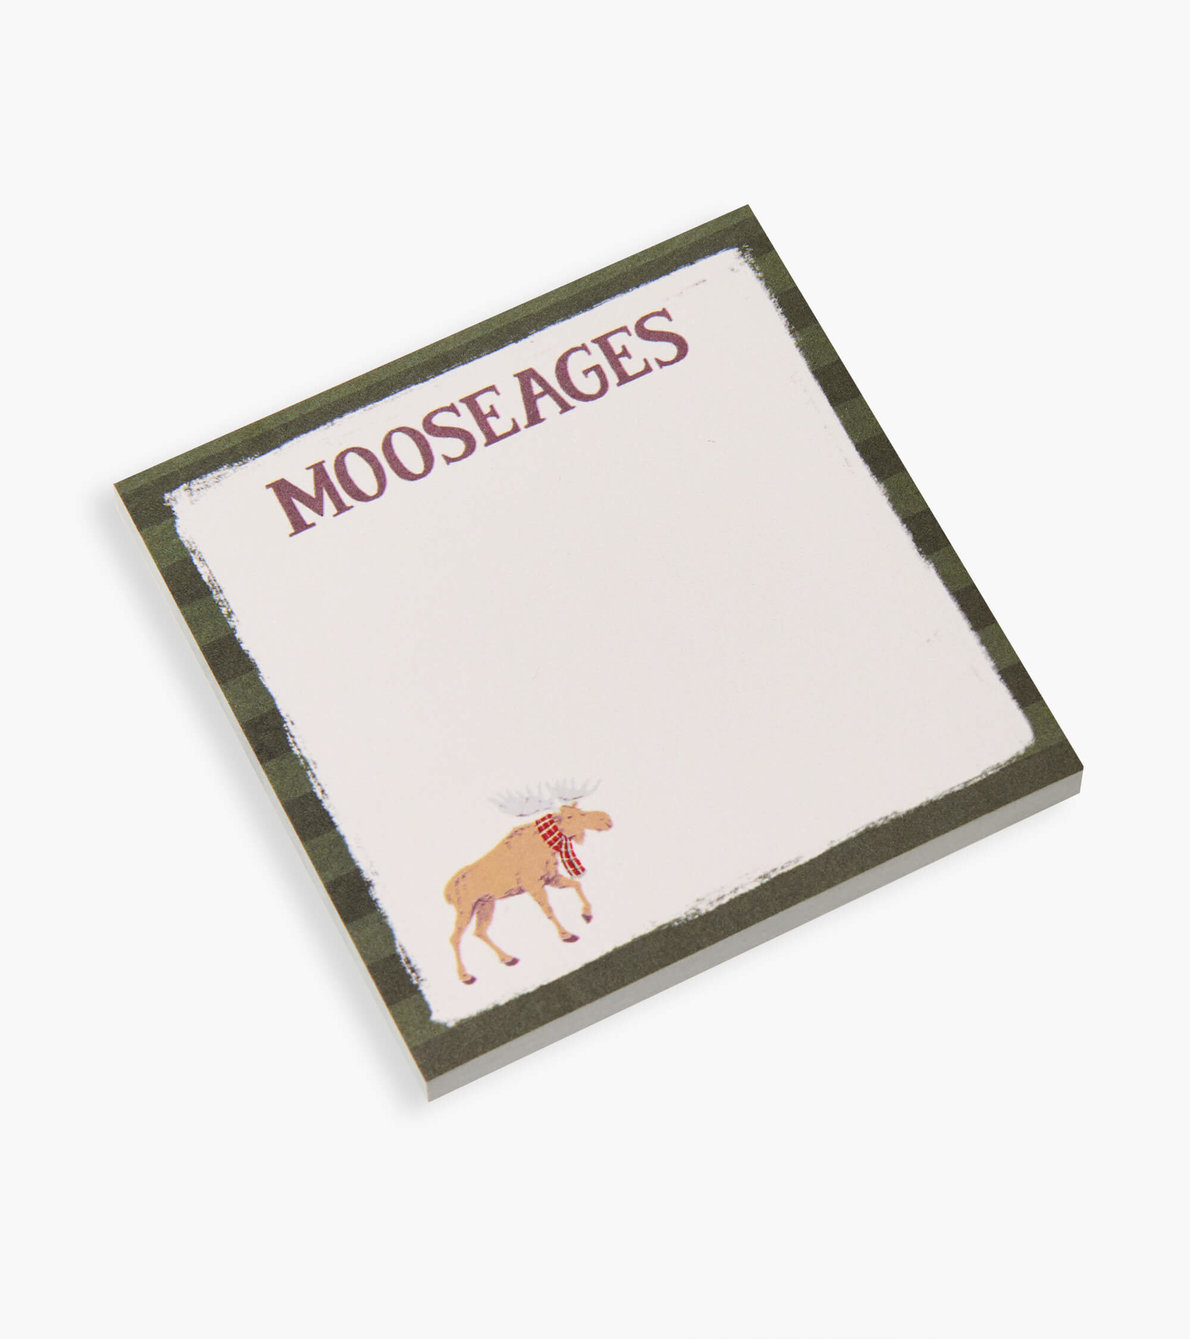 View larger image of Moosages Sticky Notes